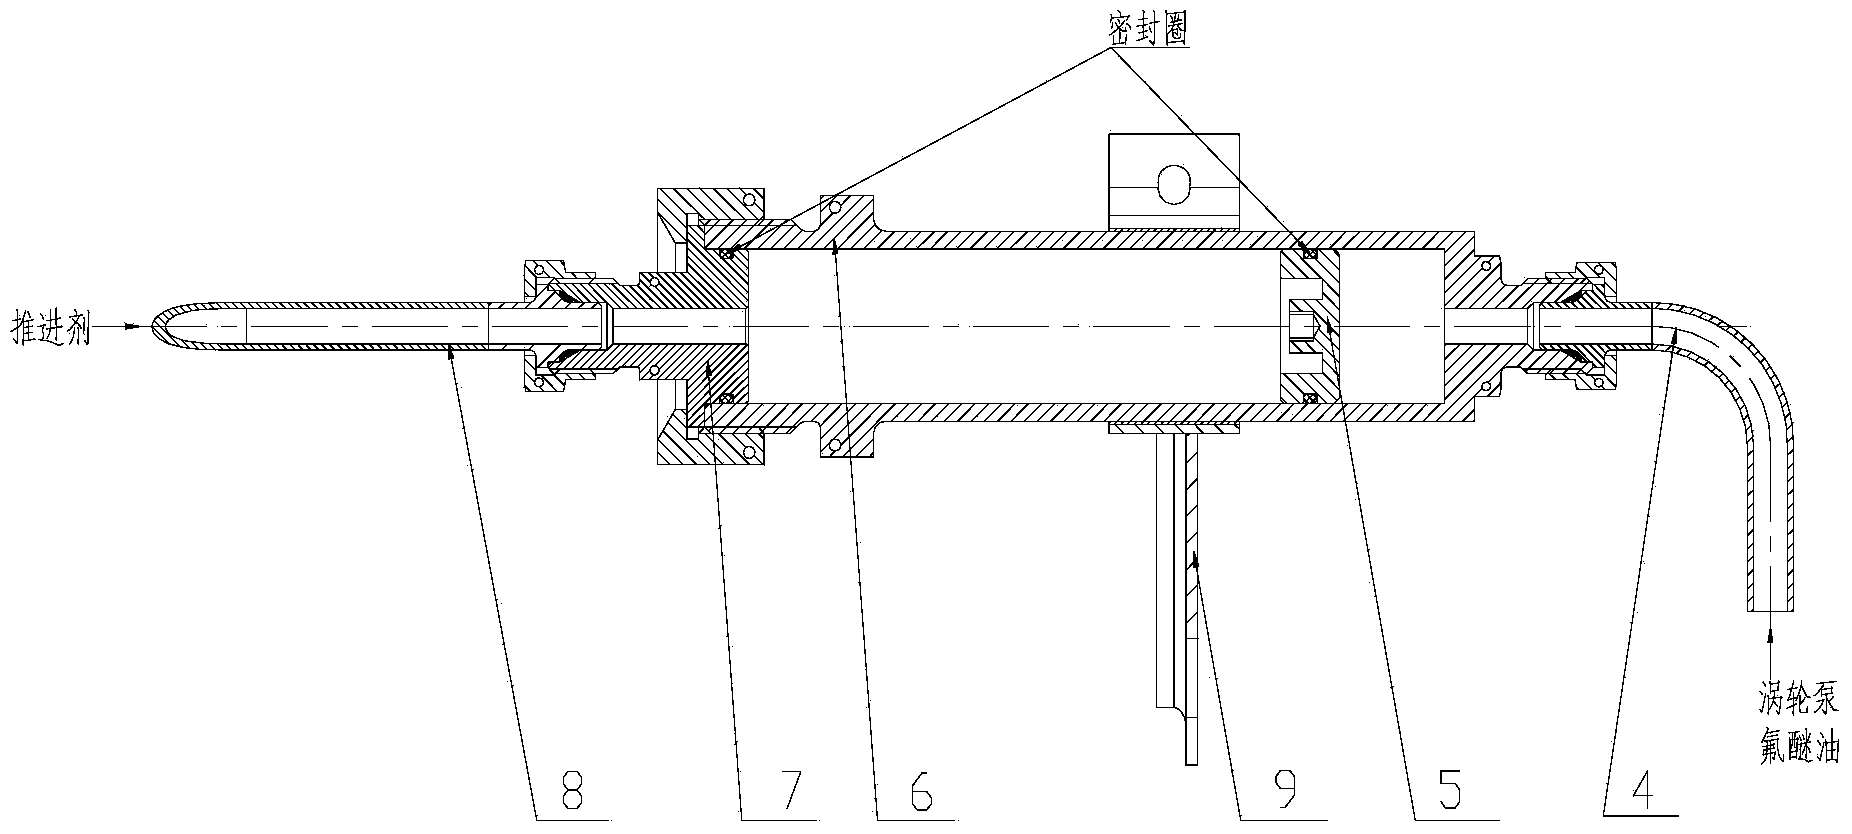 Novel pressure stabilization device for double-end surface sealing of turbine pump